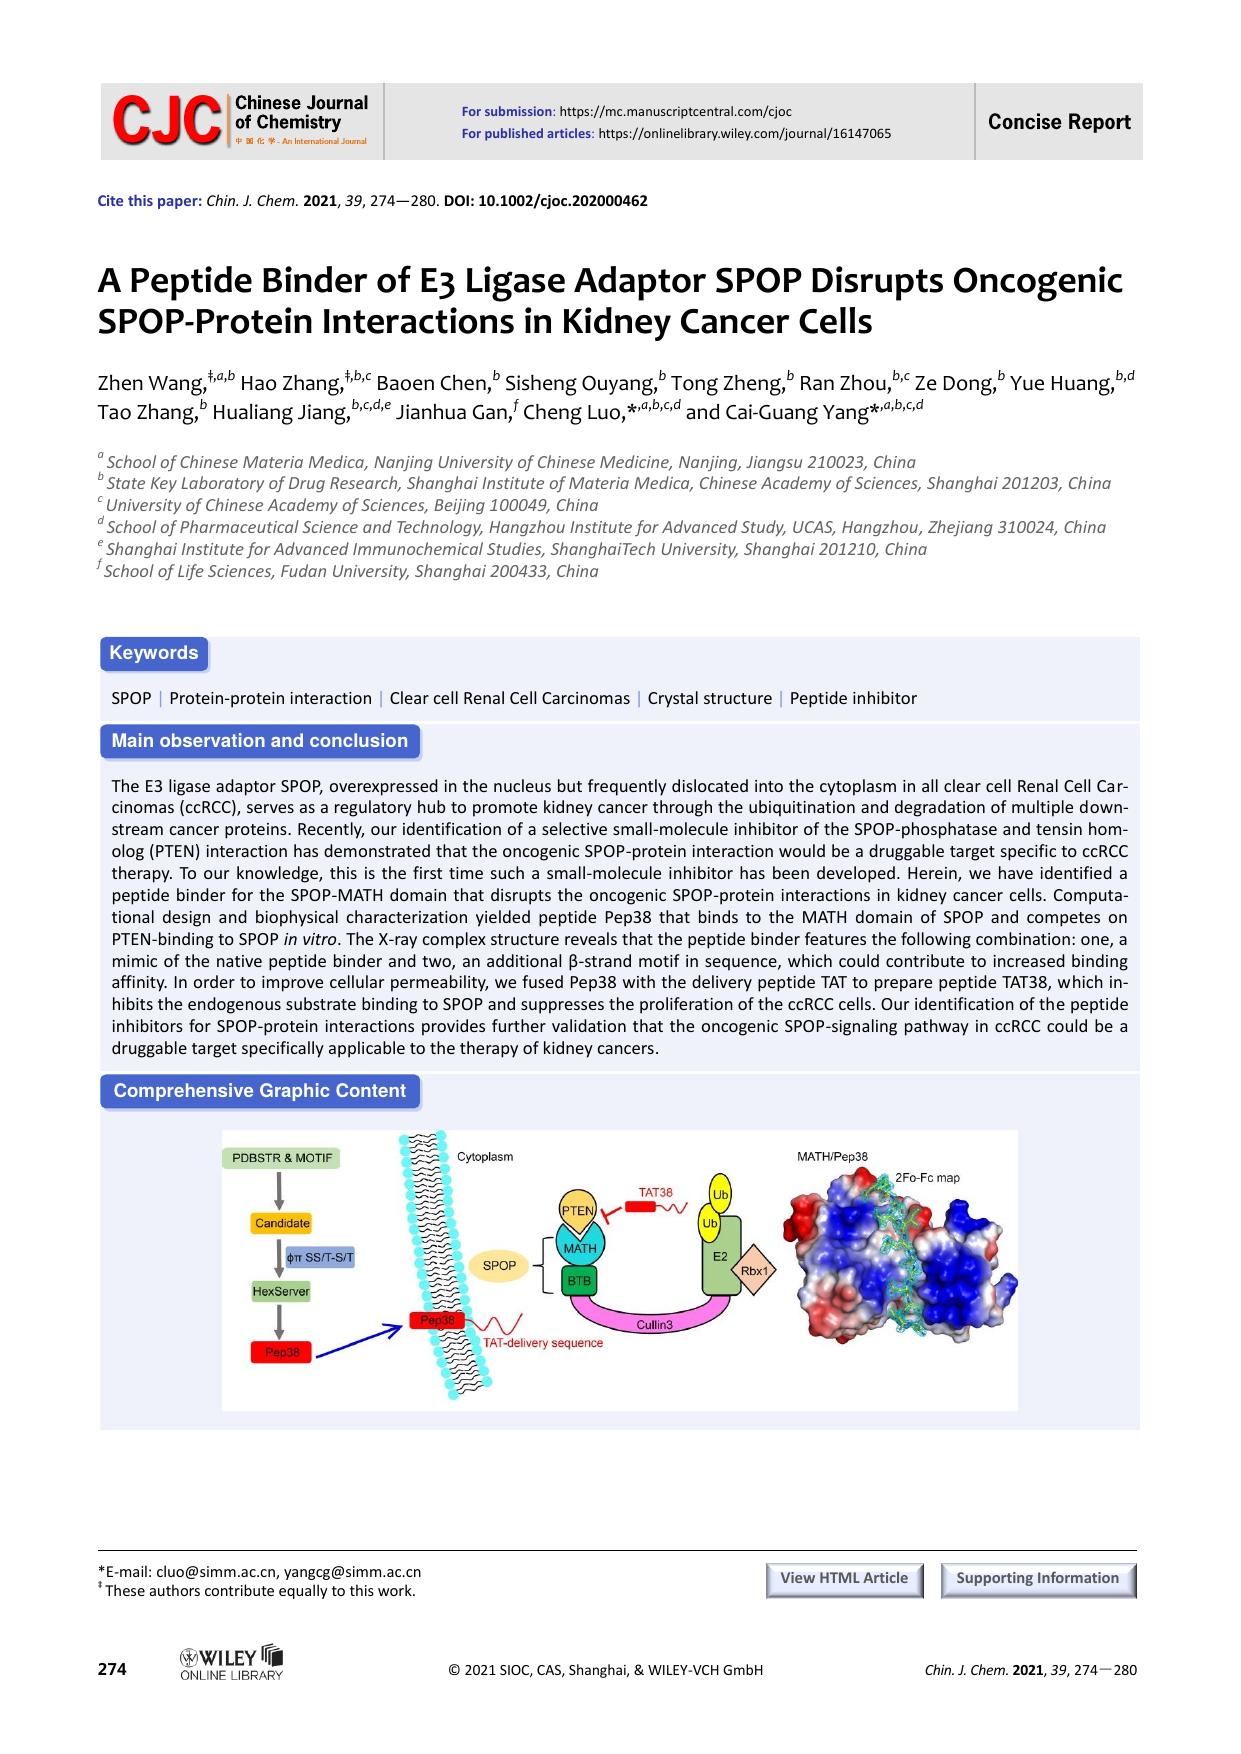 A peptide binder of E3 ligase adaptor SPOP disrupts oncogenic SPOP-protein interactions in kidney cancer cells by unknown